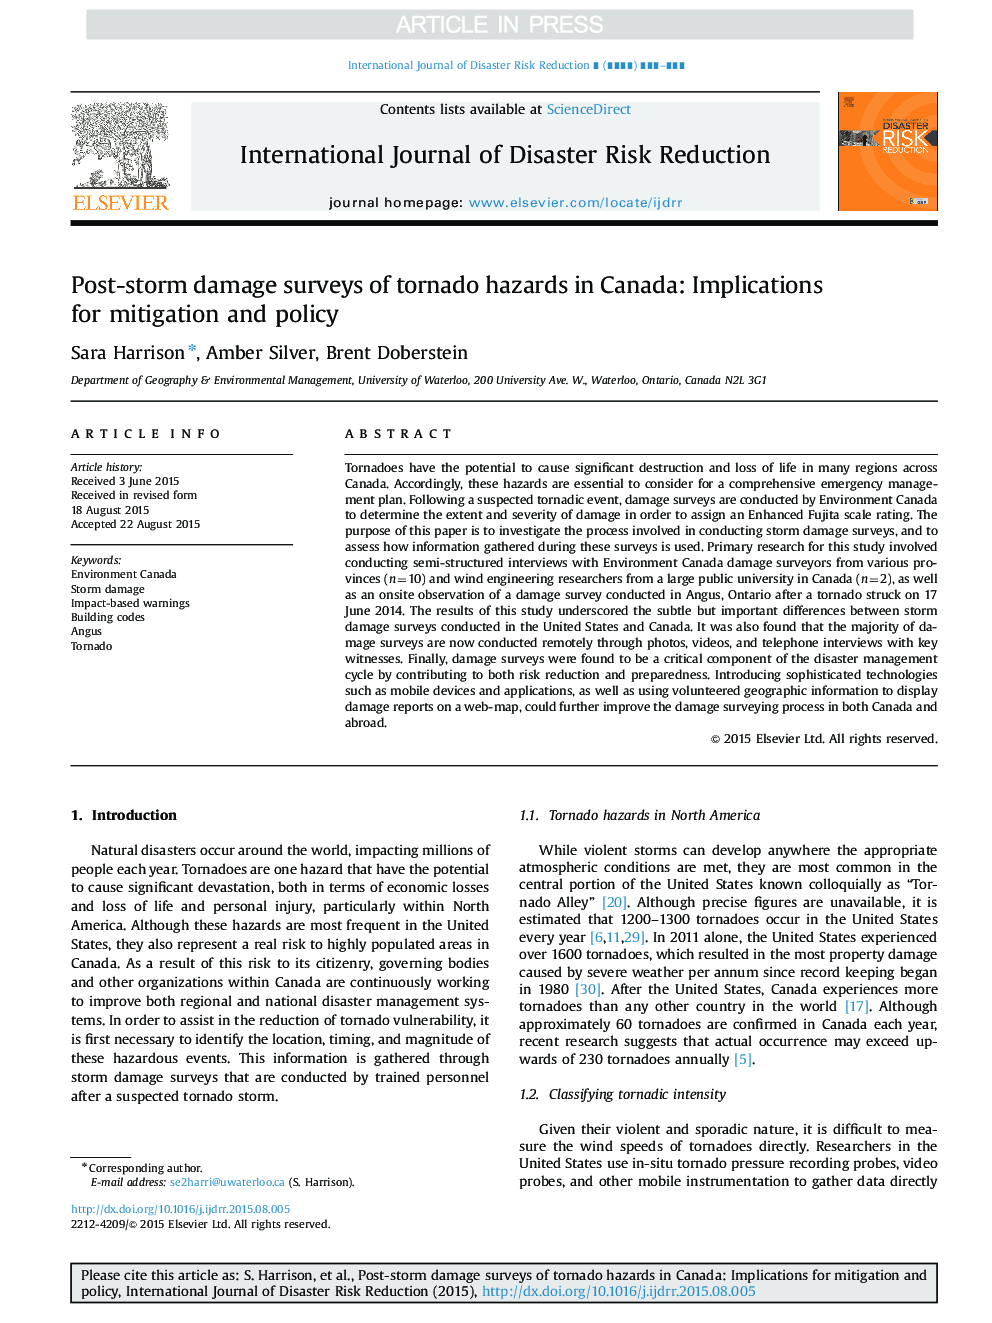 Post-storm damage surveys of tornado hazards in Canada: Implications for mitigation and policy